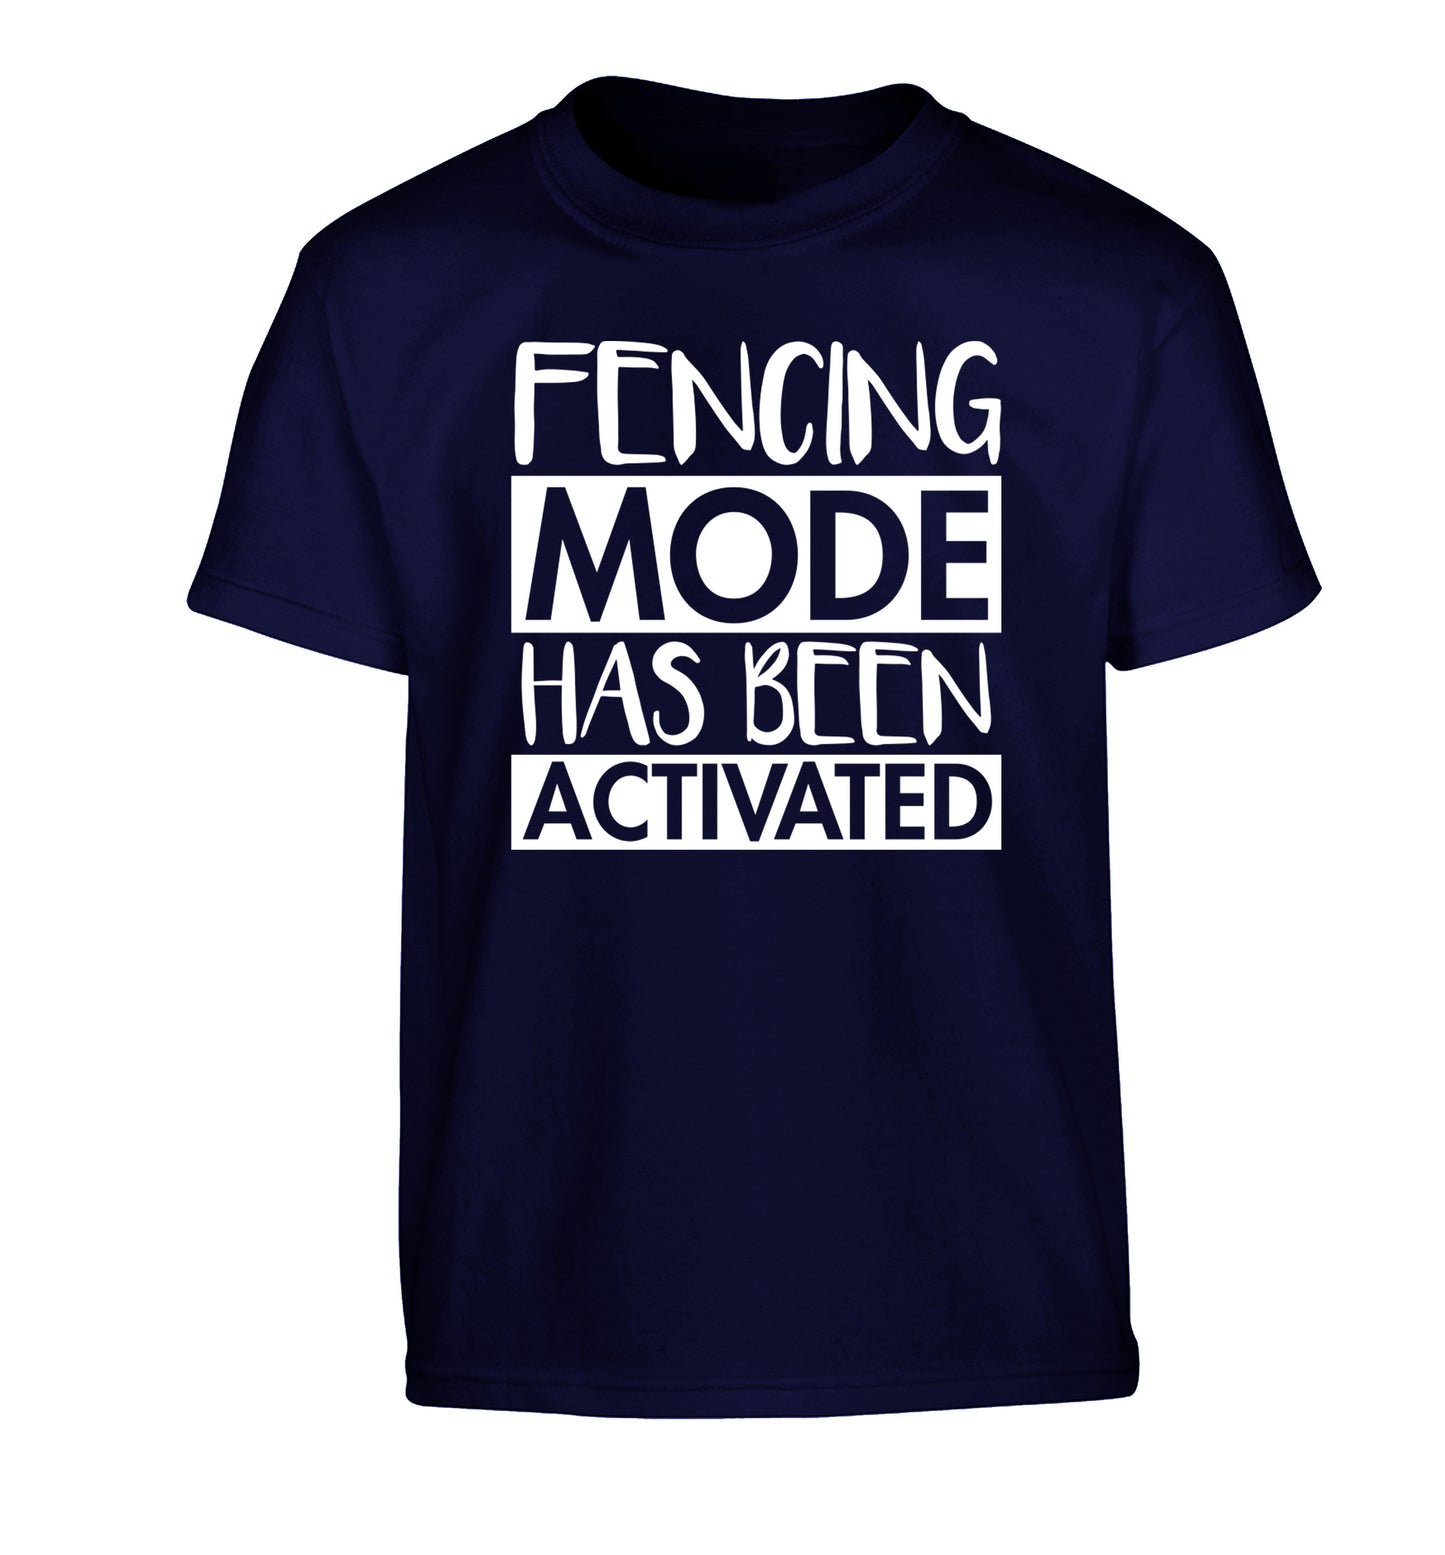 Fencing mode activated Children's navy Tshirt 12-14 Years